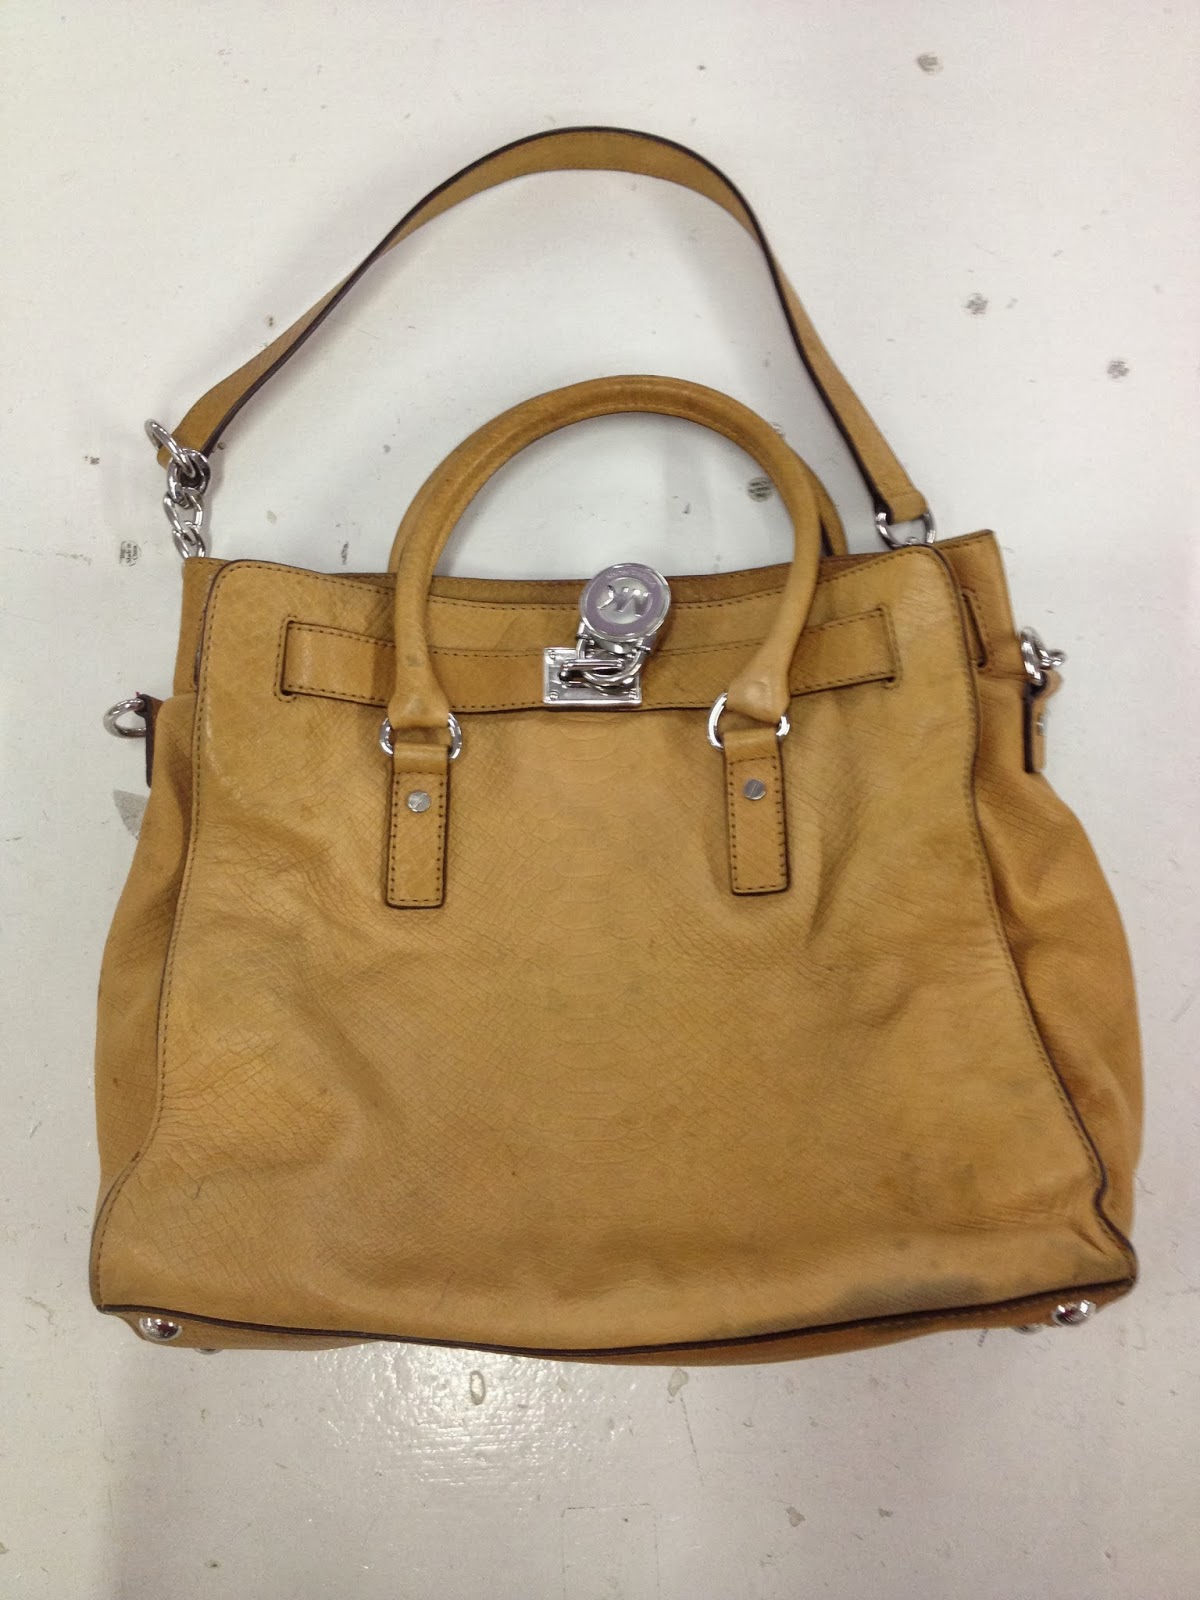 Leather Cleaning, Re-dyeing and Restoration: Michael Kors Handbag ...